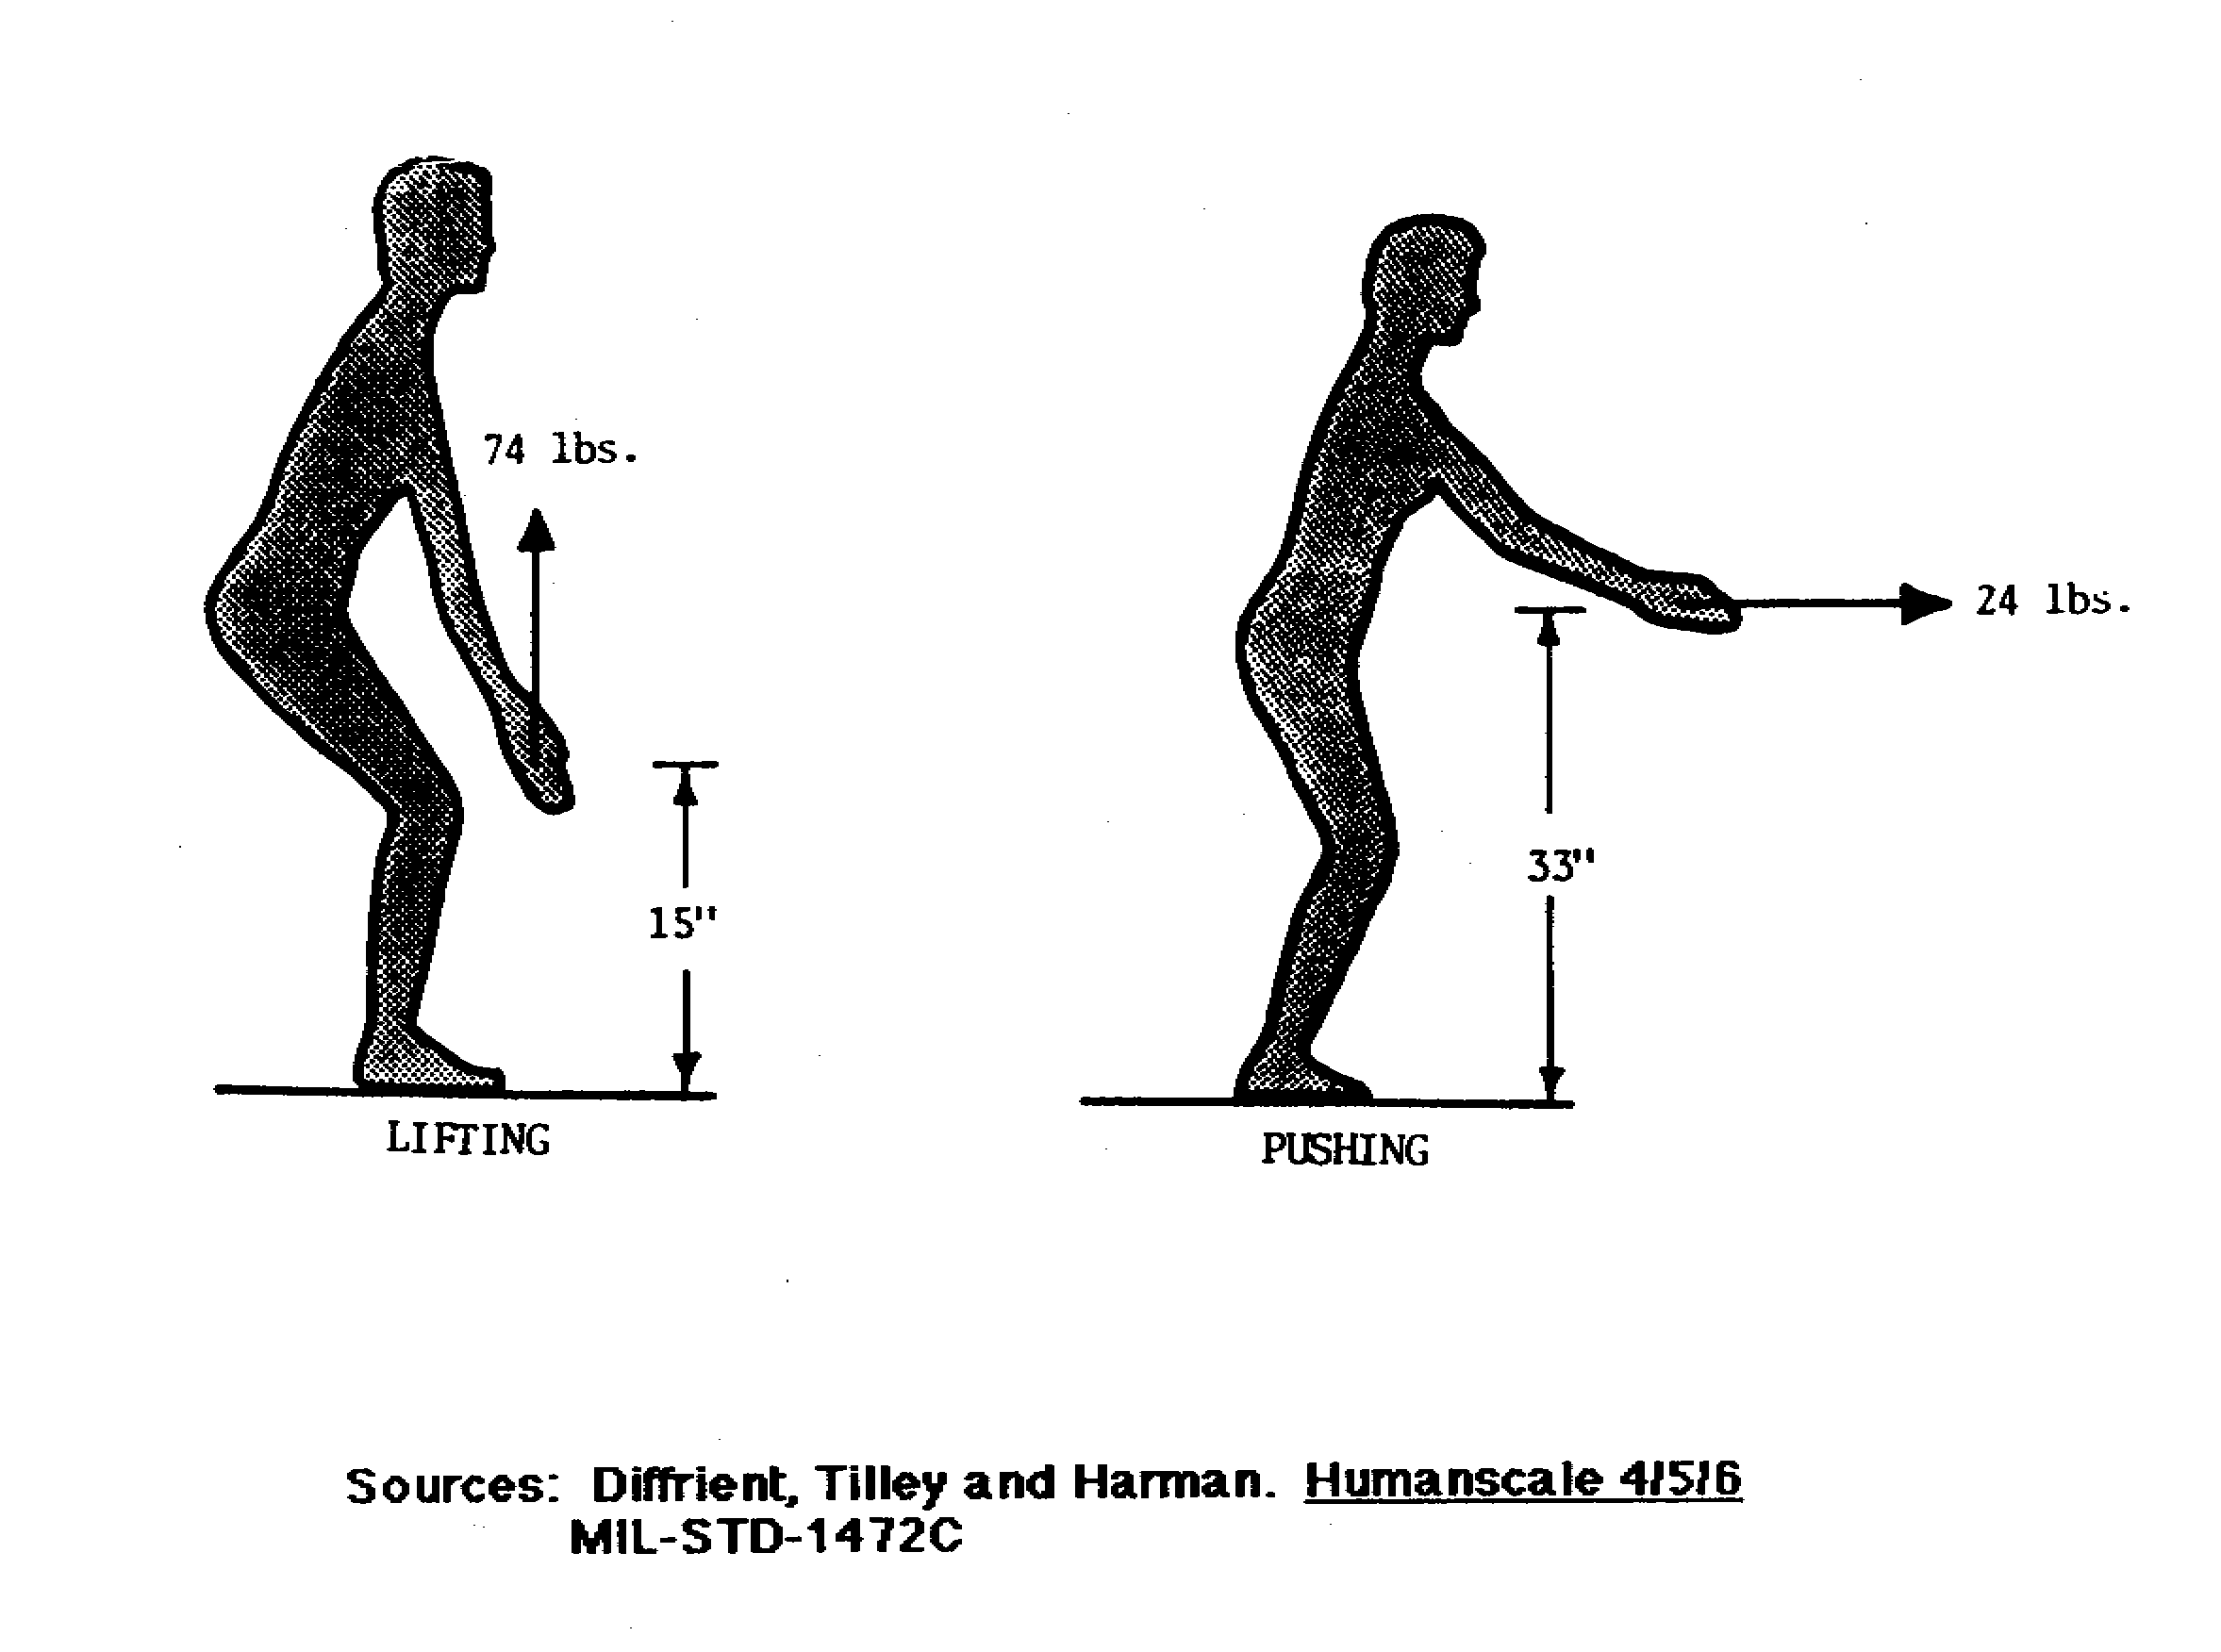 This figure depicts the lifting and pushing strength for the 5th percentile of females.  The first represents a 74 pound lifting limit at 15 inches off the ground.  The second represents a 24 pound pushing force at 33 inches off the ground.